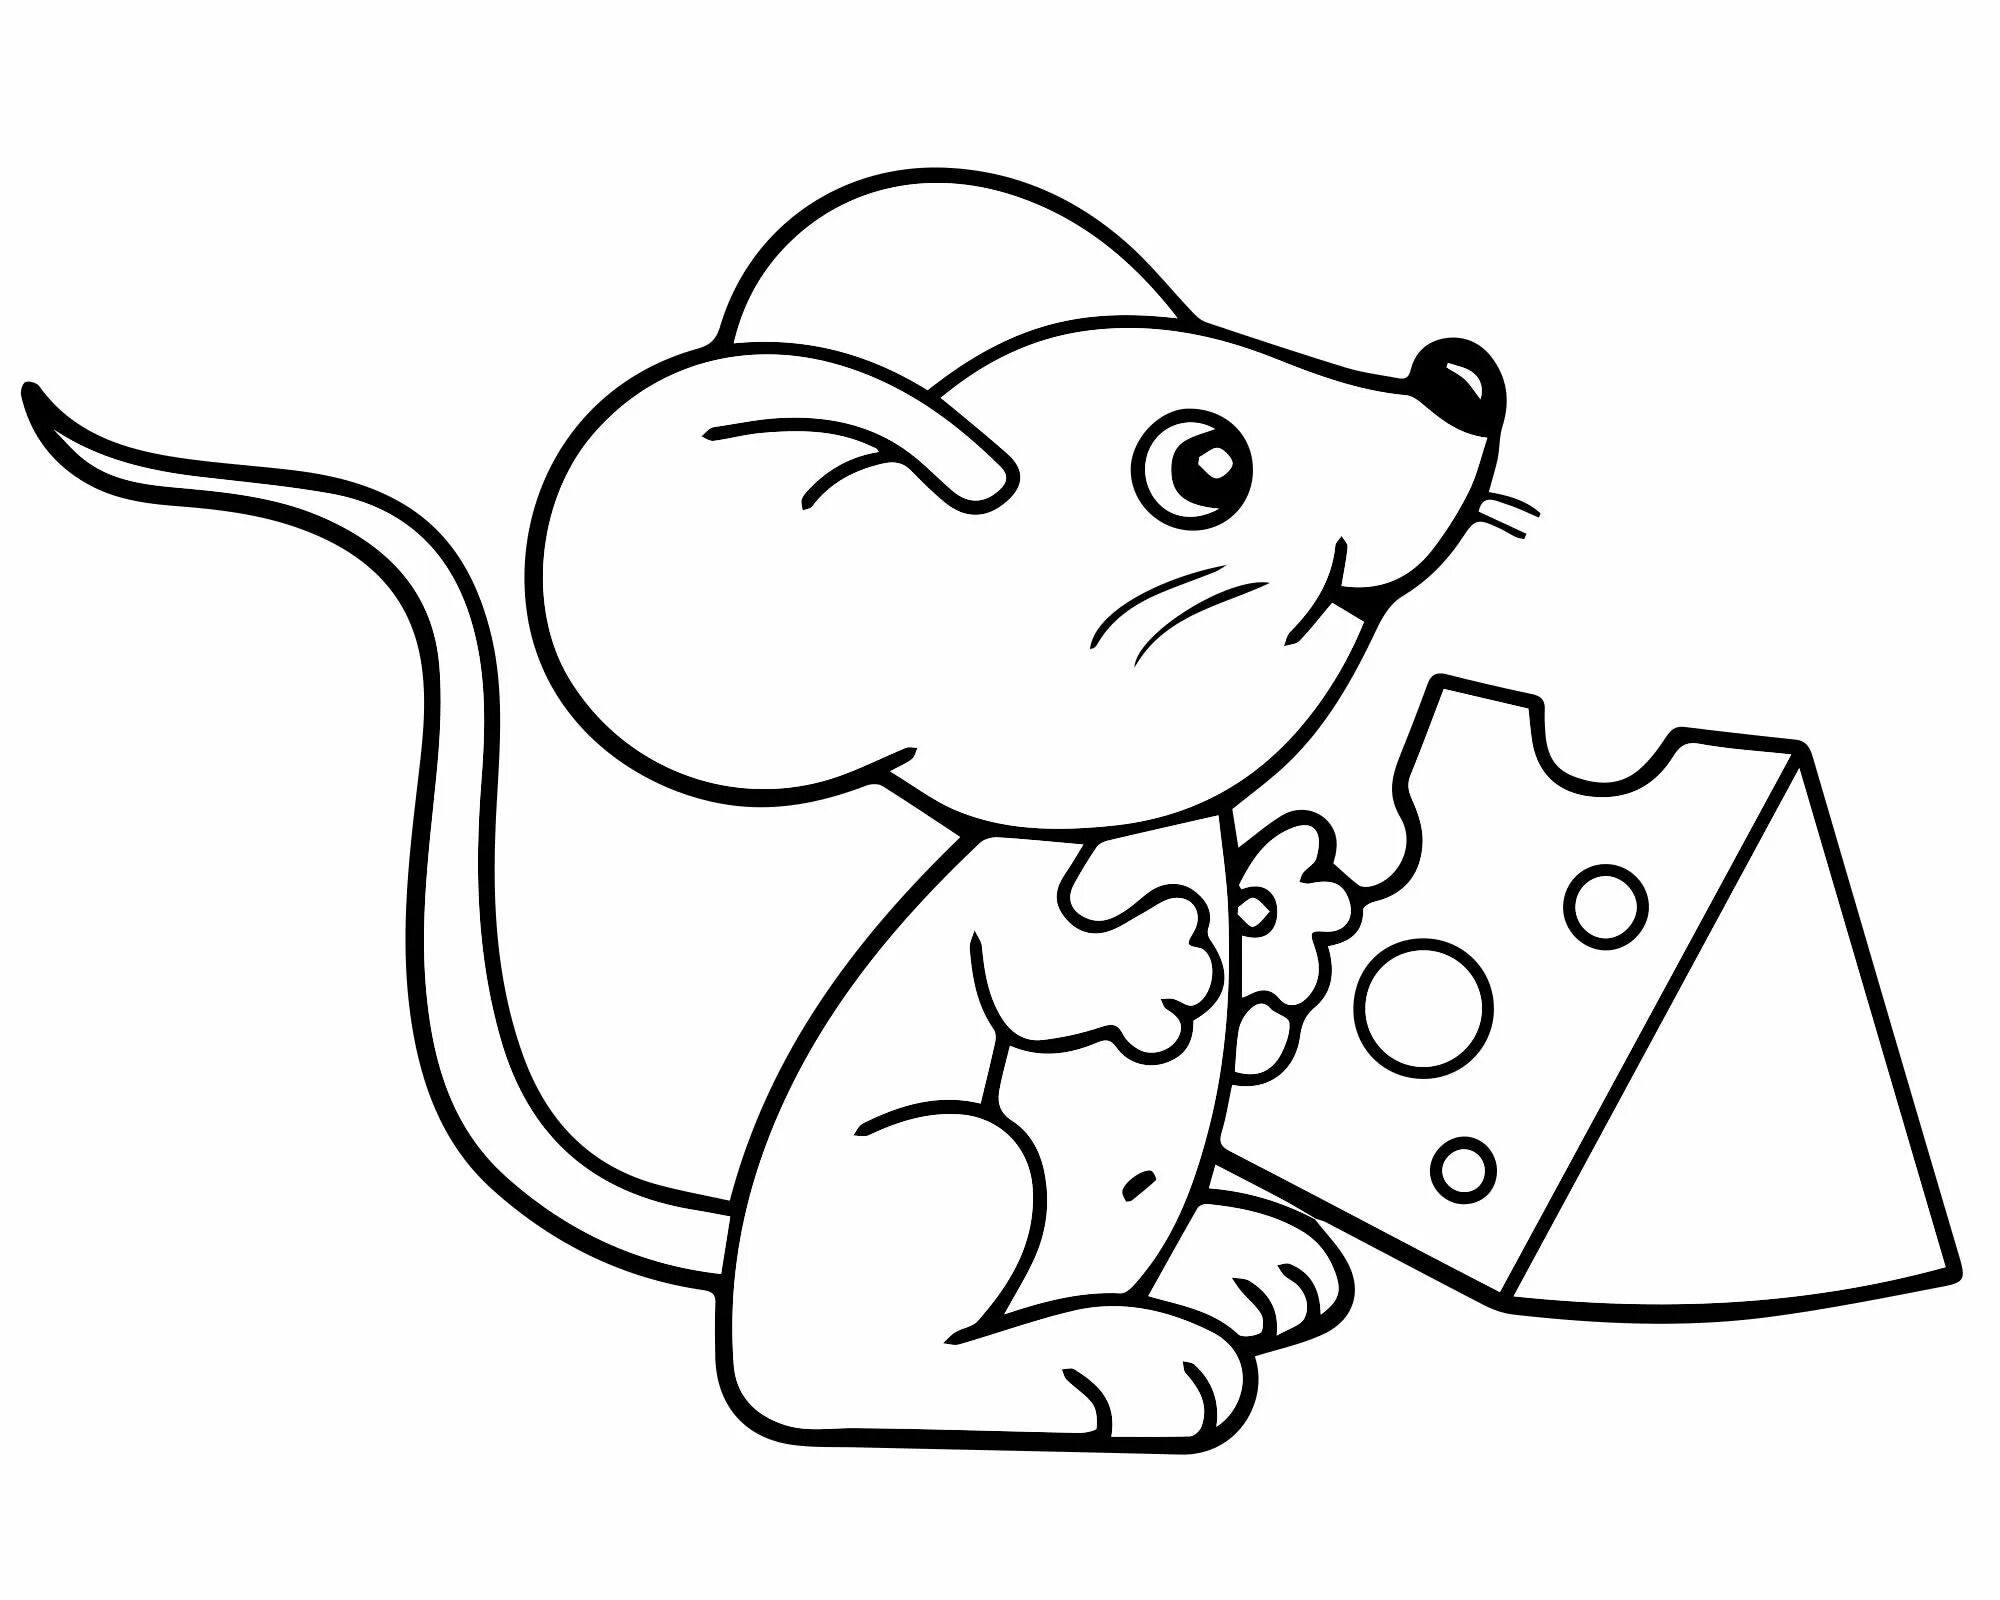 Great mouse coloring book for 3-4 year olds